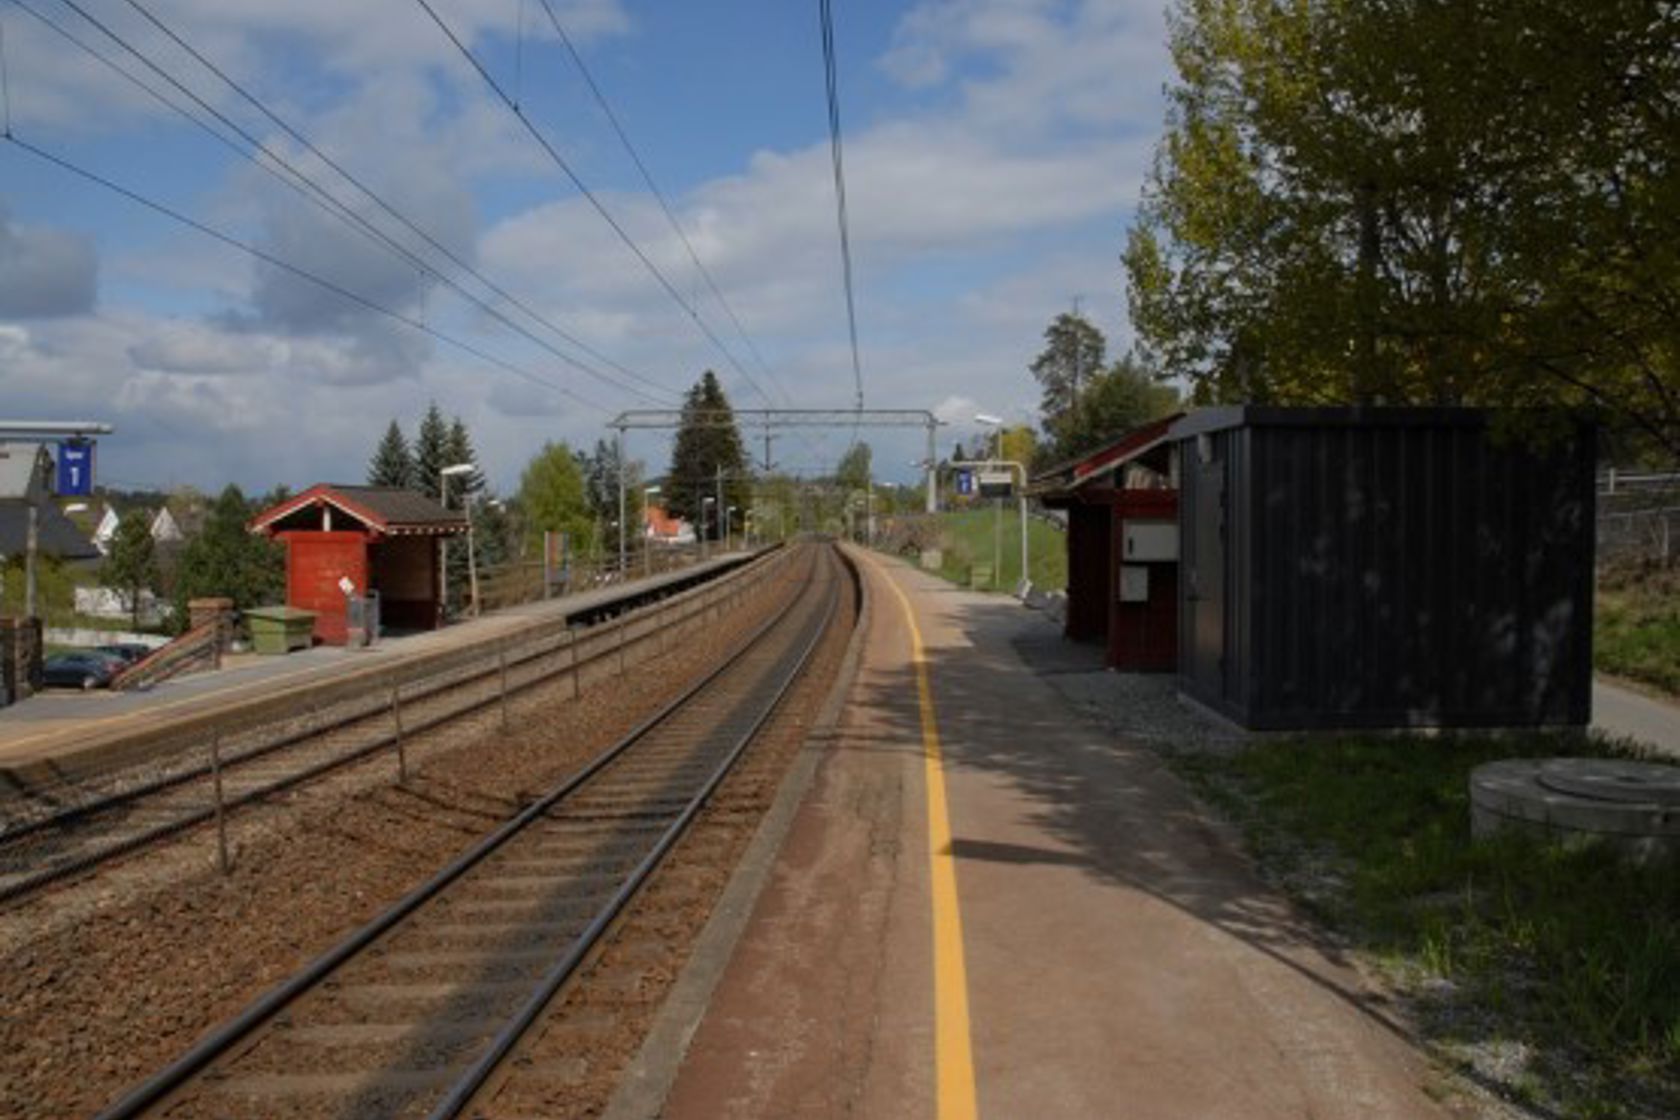 Exterior view of Solbråtan station